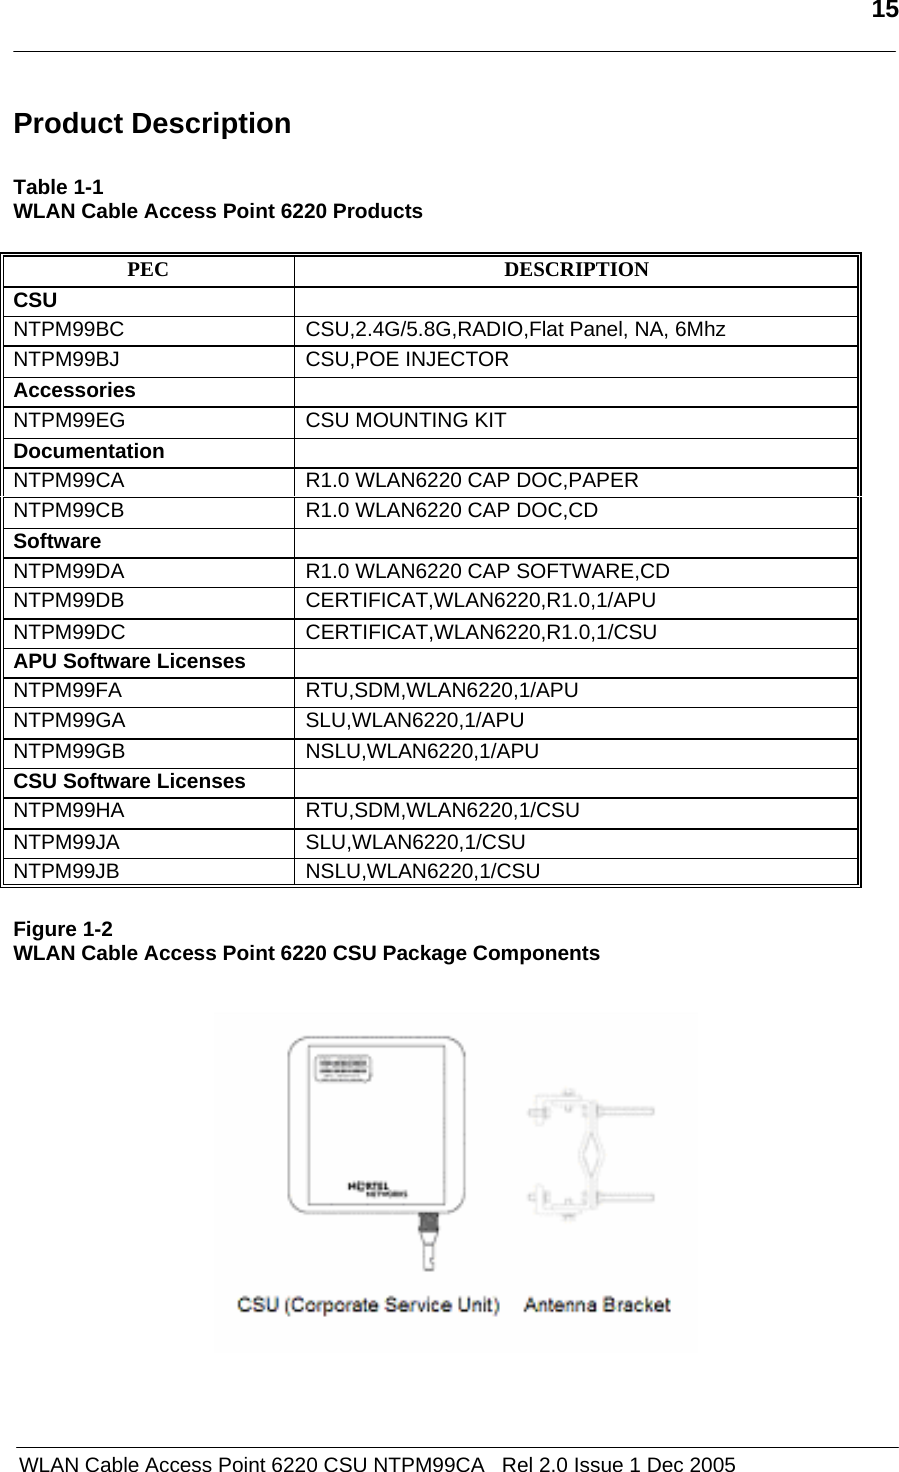   15   WLAN Cable Access Point 6220 CSU NTPM99CA   Rel 2.0 Issue 1 Dec 2005 Product Description  Table 1-1 WLAN Cable Access Point 6220 Products  PEC DESCRIPTION CSU    NTPM99BC  CSU,2.4G/5.8G,RADIO,Flat Panel, NA, 6Mhz NTPM99BJ CSU,POE INJECTOR Accessories    NTPM99EG  CSU MOUNTING KIT Documentation    NTPM99CA  R1.0 WLAN6220 CAP DOC,PAPER NTPM99CB  R1.0 WLAN6220 CAP DOC,CD Software    NTPM99DA  R1.0 WLAN6220 CAP SOFTWARE,CD  NTPM99DB CERTIFICAT,WLAN6220,R1.0,1/APU NTPM99DC CERTIFICAT,WLAN6220,R1.0,1/CSU APU Software Licenses    NTPM99FA RTU,SDM,WLAN6220,1/APU NTPM99GA SLU,WLAN6220,1/APU NTPM99GB NSLU,WLAN6220,1/APU CSU Software Licenses    NTPM99HA RTU,SDM,WLAN6220,1/CSU NTPM99JA SLU,WLAN6220,1/CSU NTPM99JB NSLU,WLAN6220,1/CSU  Figure 1-2 WLAN Cable Access Point 6220 CSU Package Components        